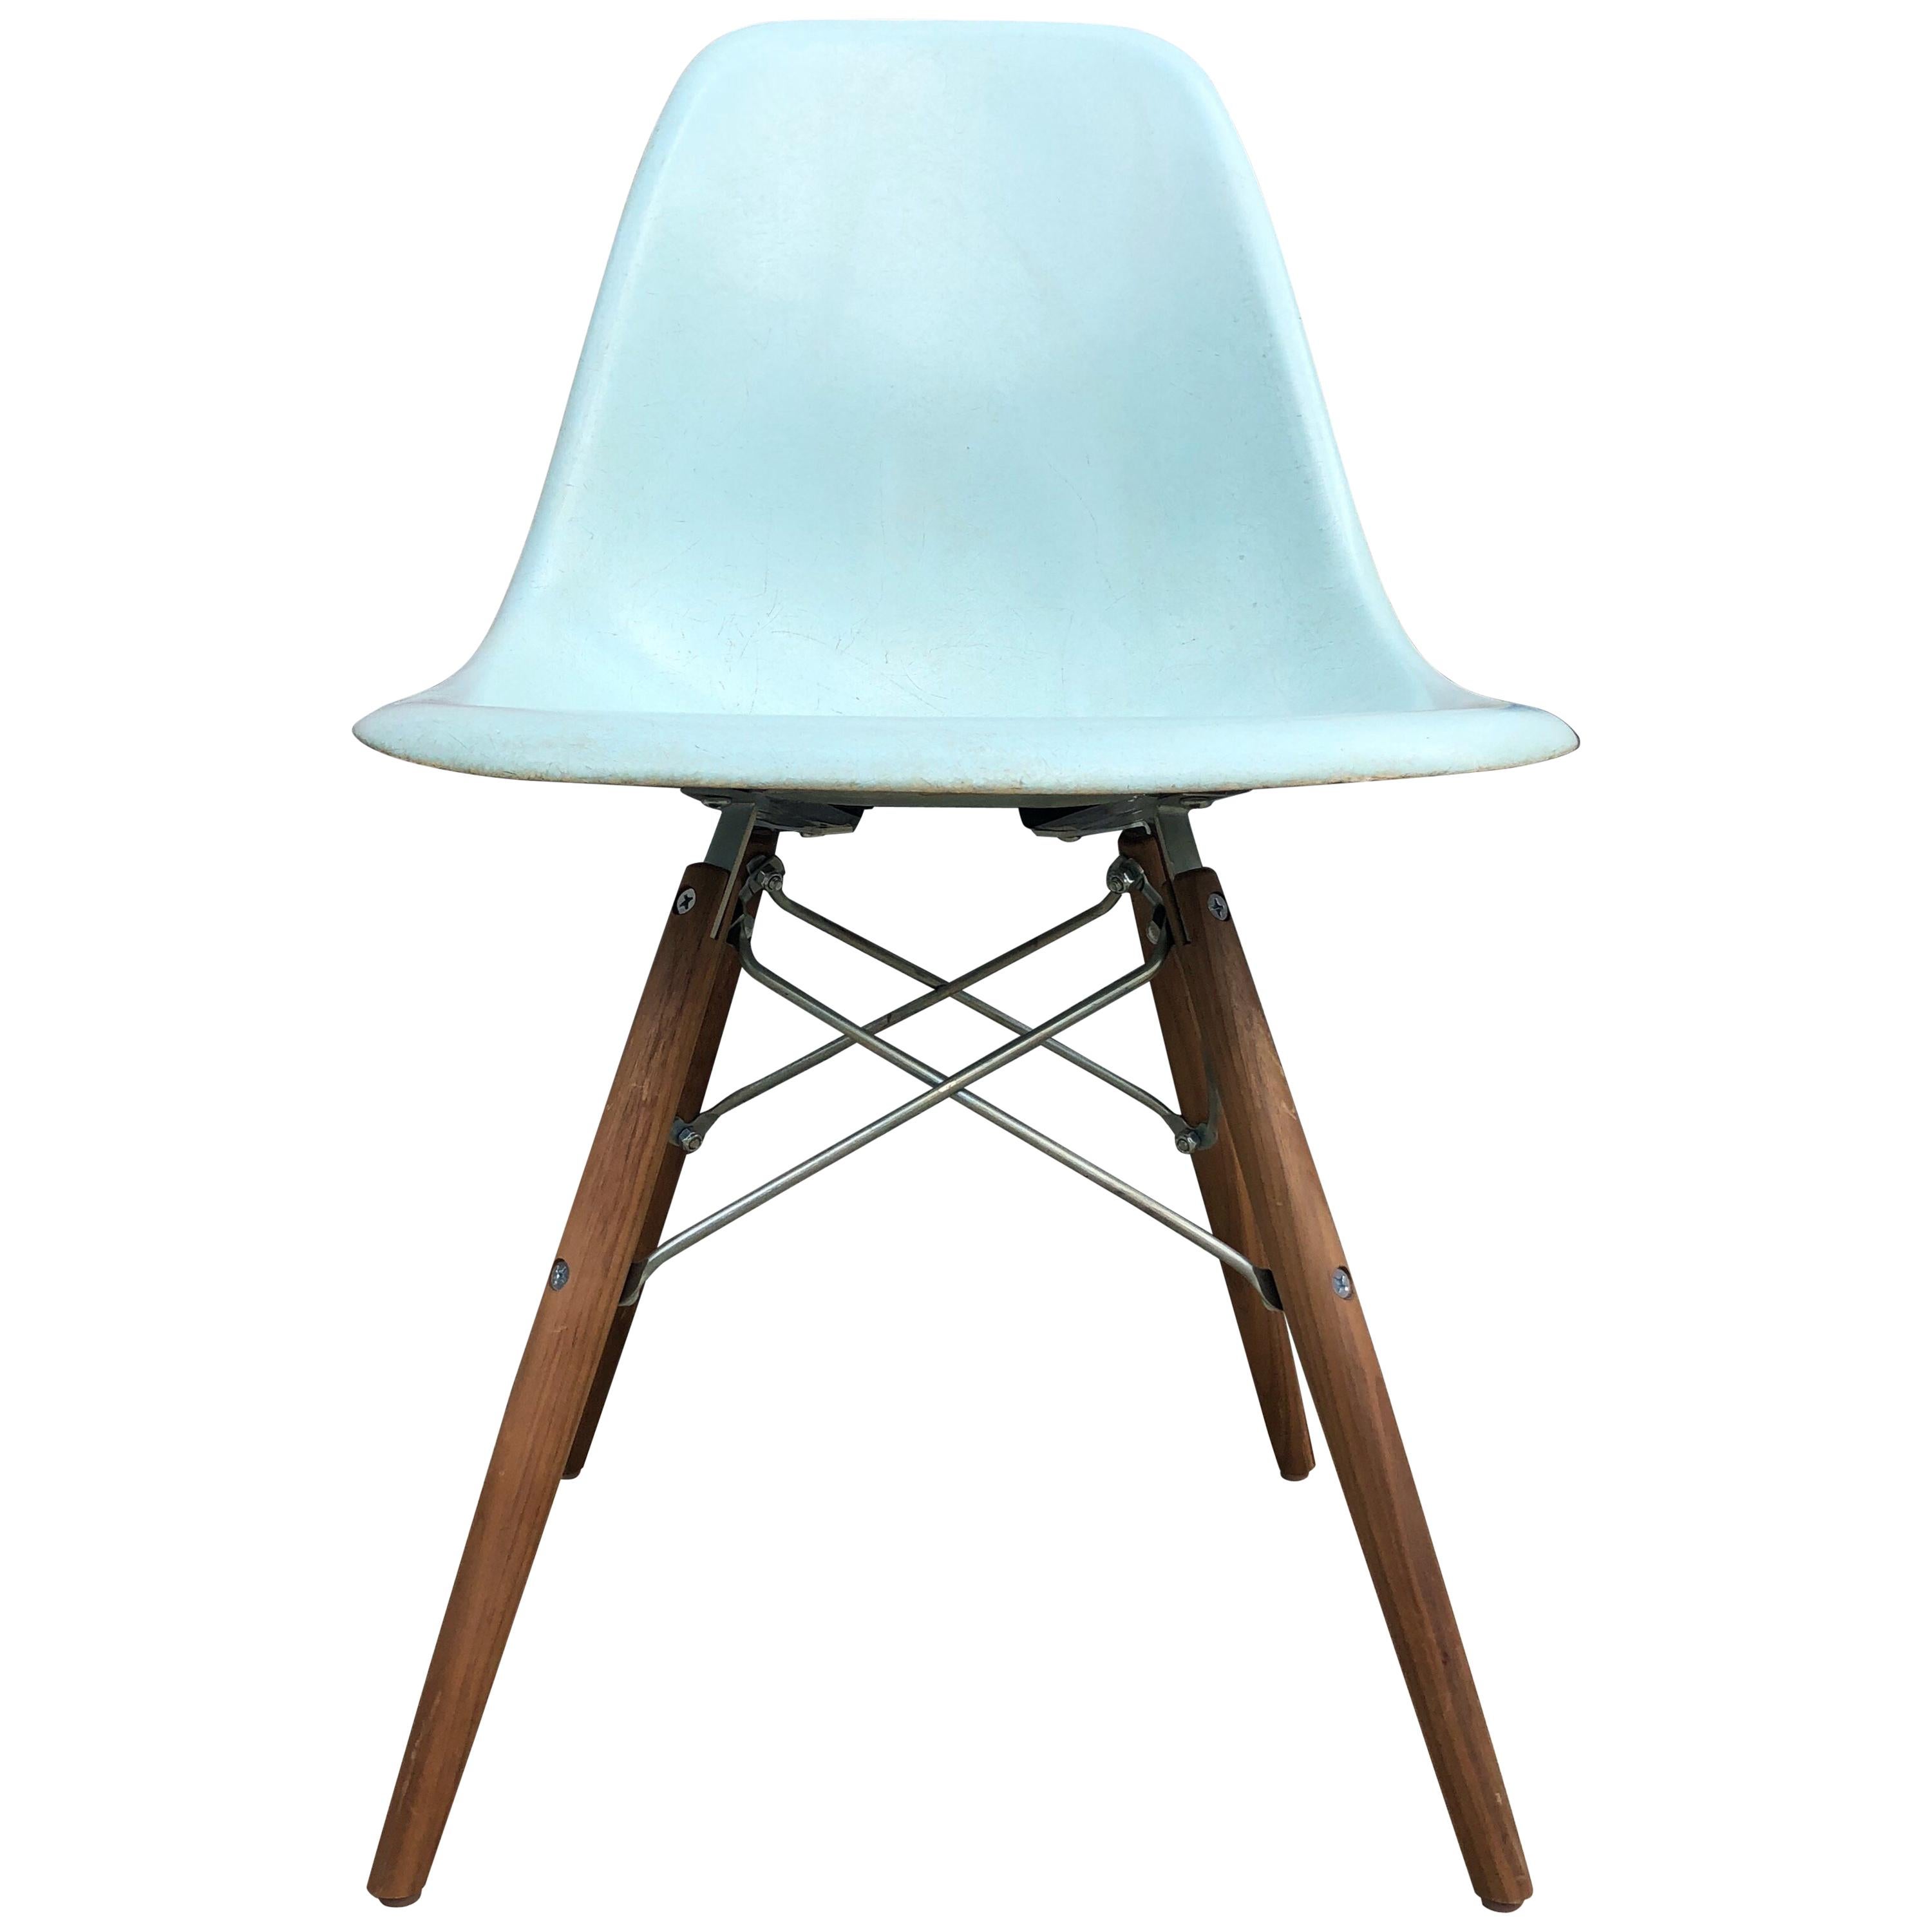 Four Rare Herman Miller Eames Dining Chairs in Robin’s Egg Blue